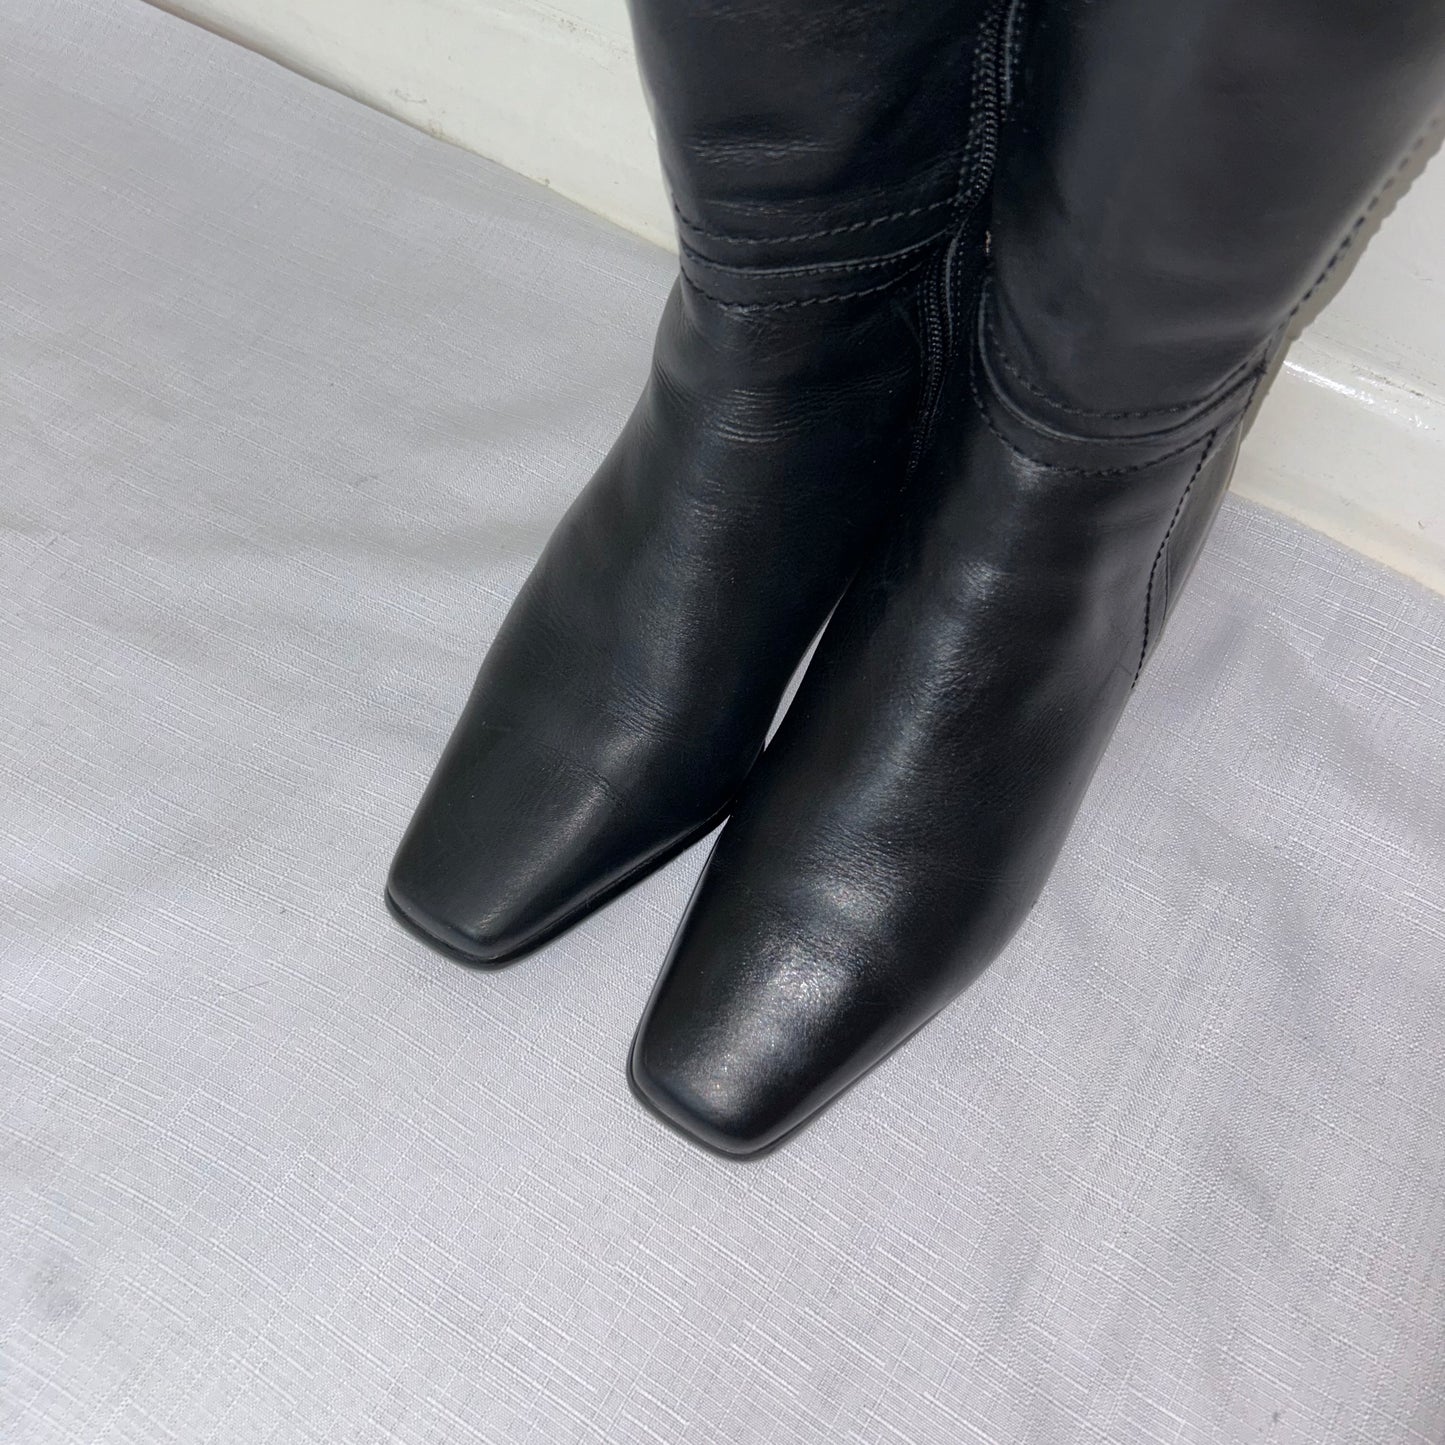 toes of black knee high leather boots shown on a white background